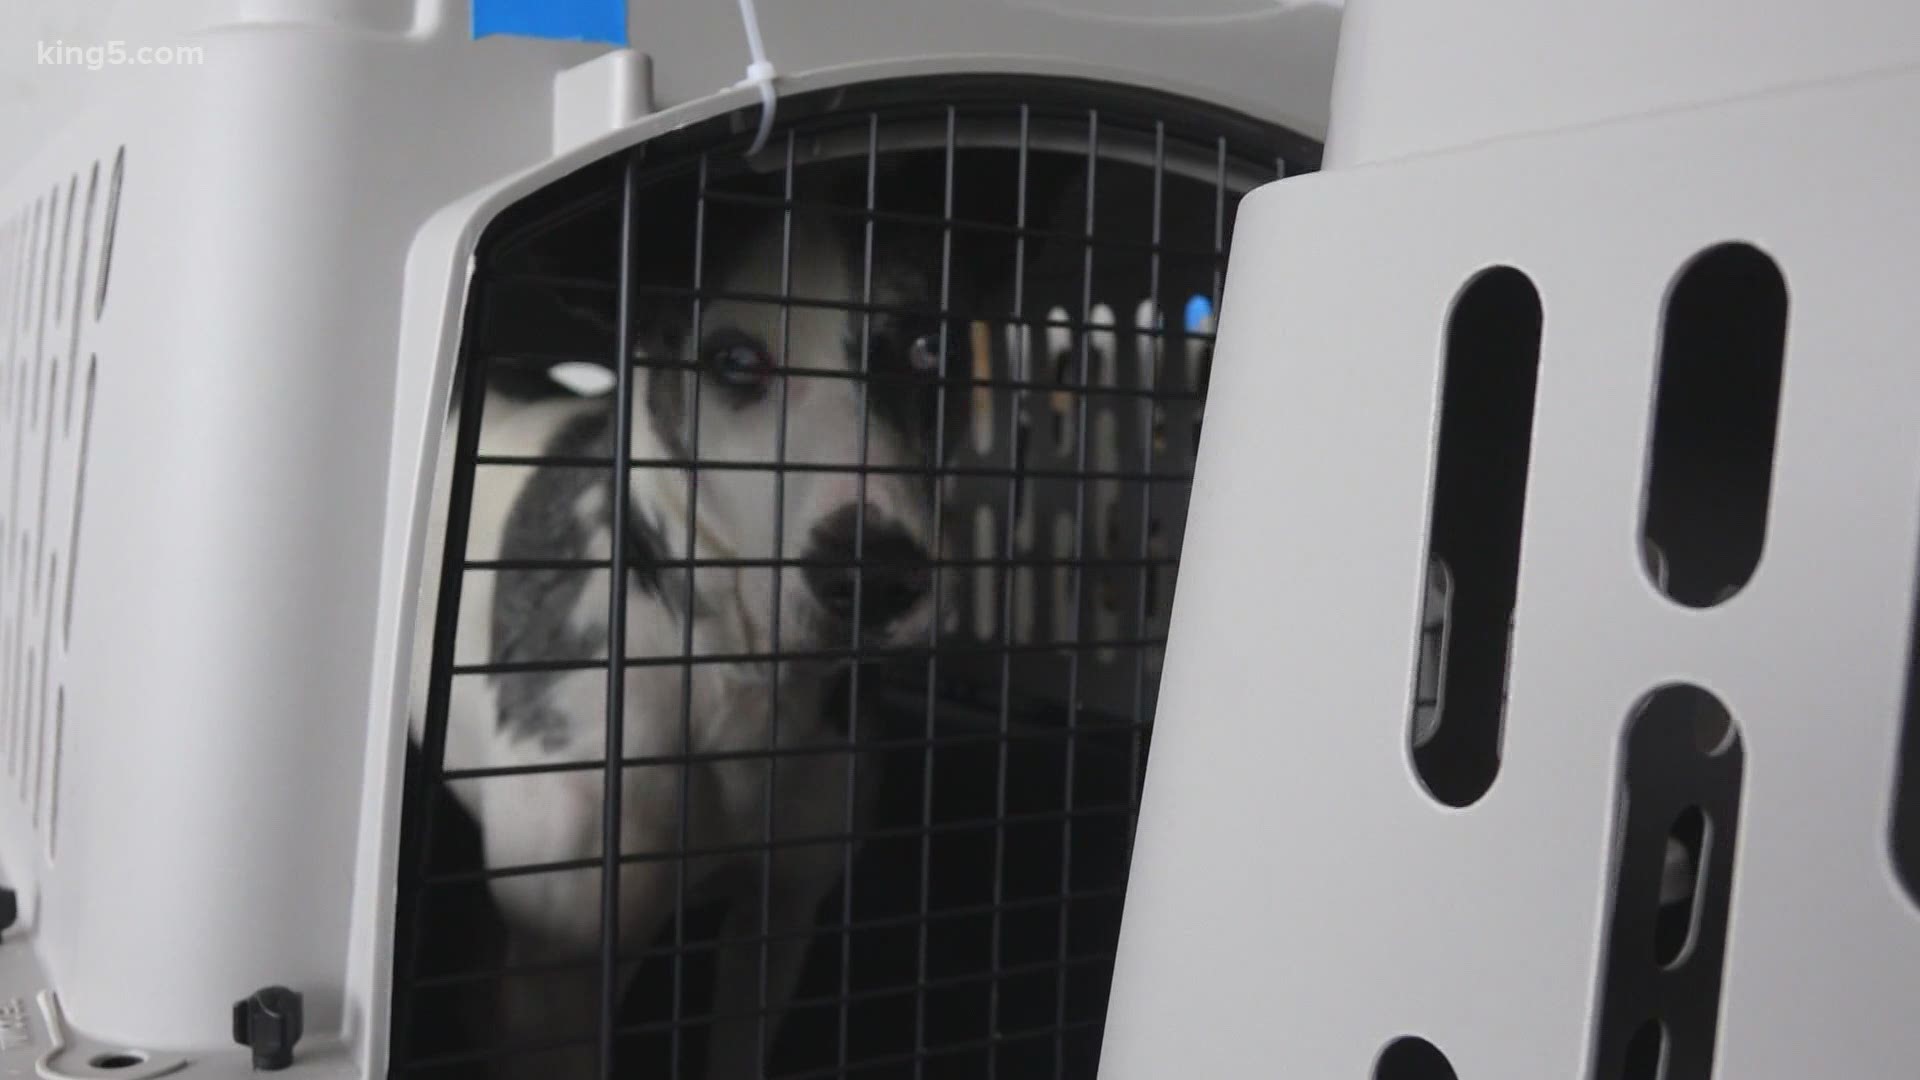 More than 600 dogs and cats flown from Hawaii to Seattle to find new homes  